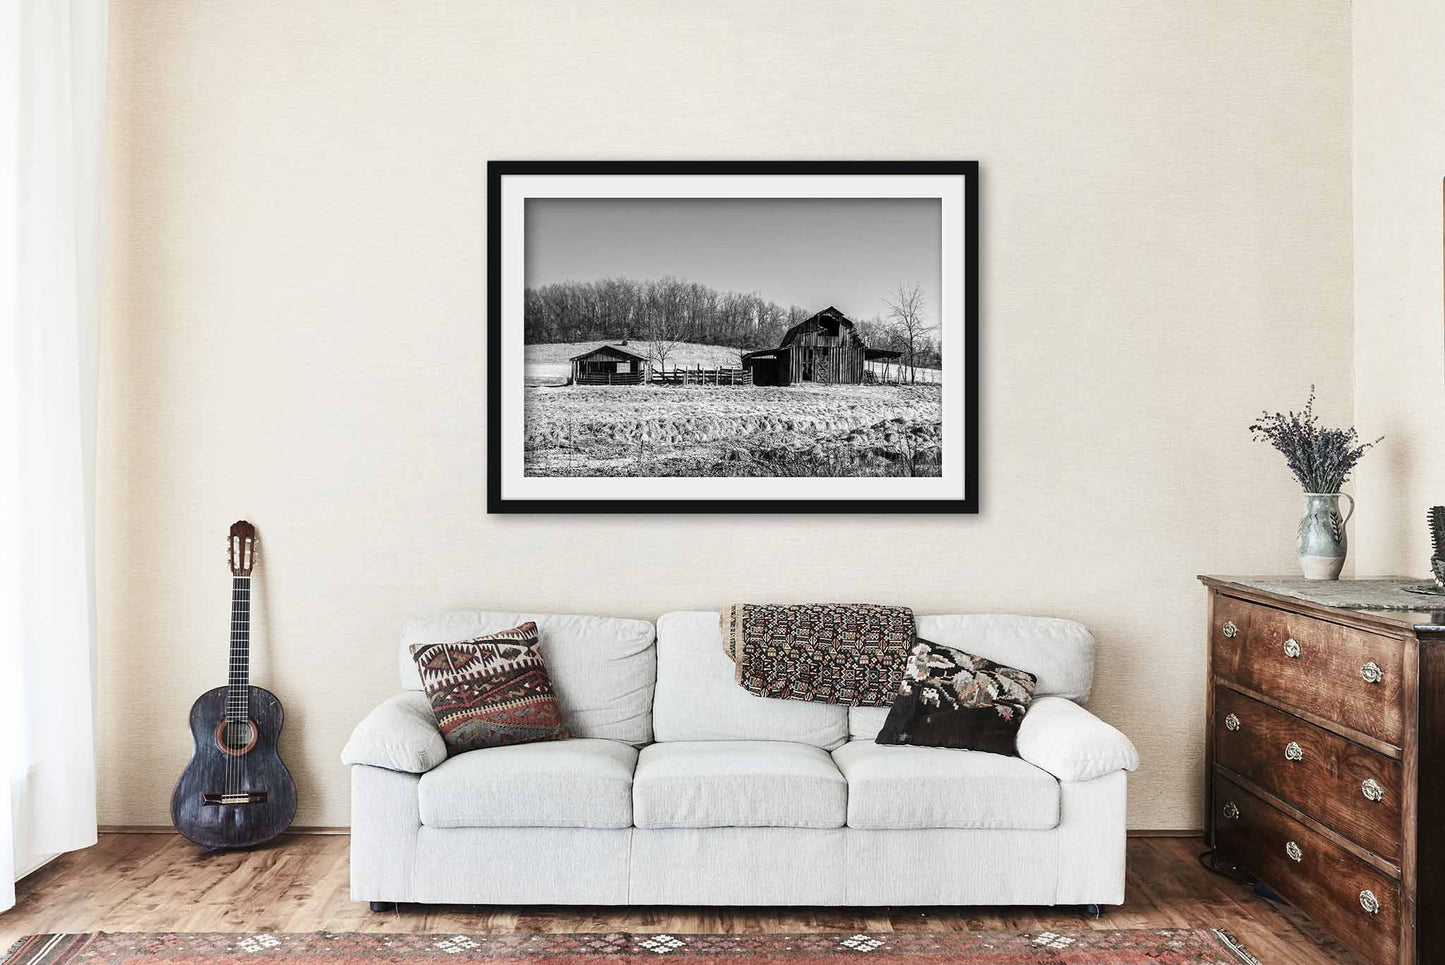 Rustic Barn and Pen Framed Print | Black and White Wall Art | Country Photography | Arkansas Photo | Farmhouse Decor